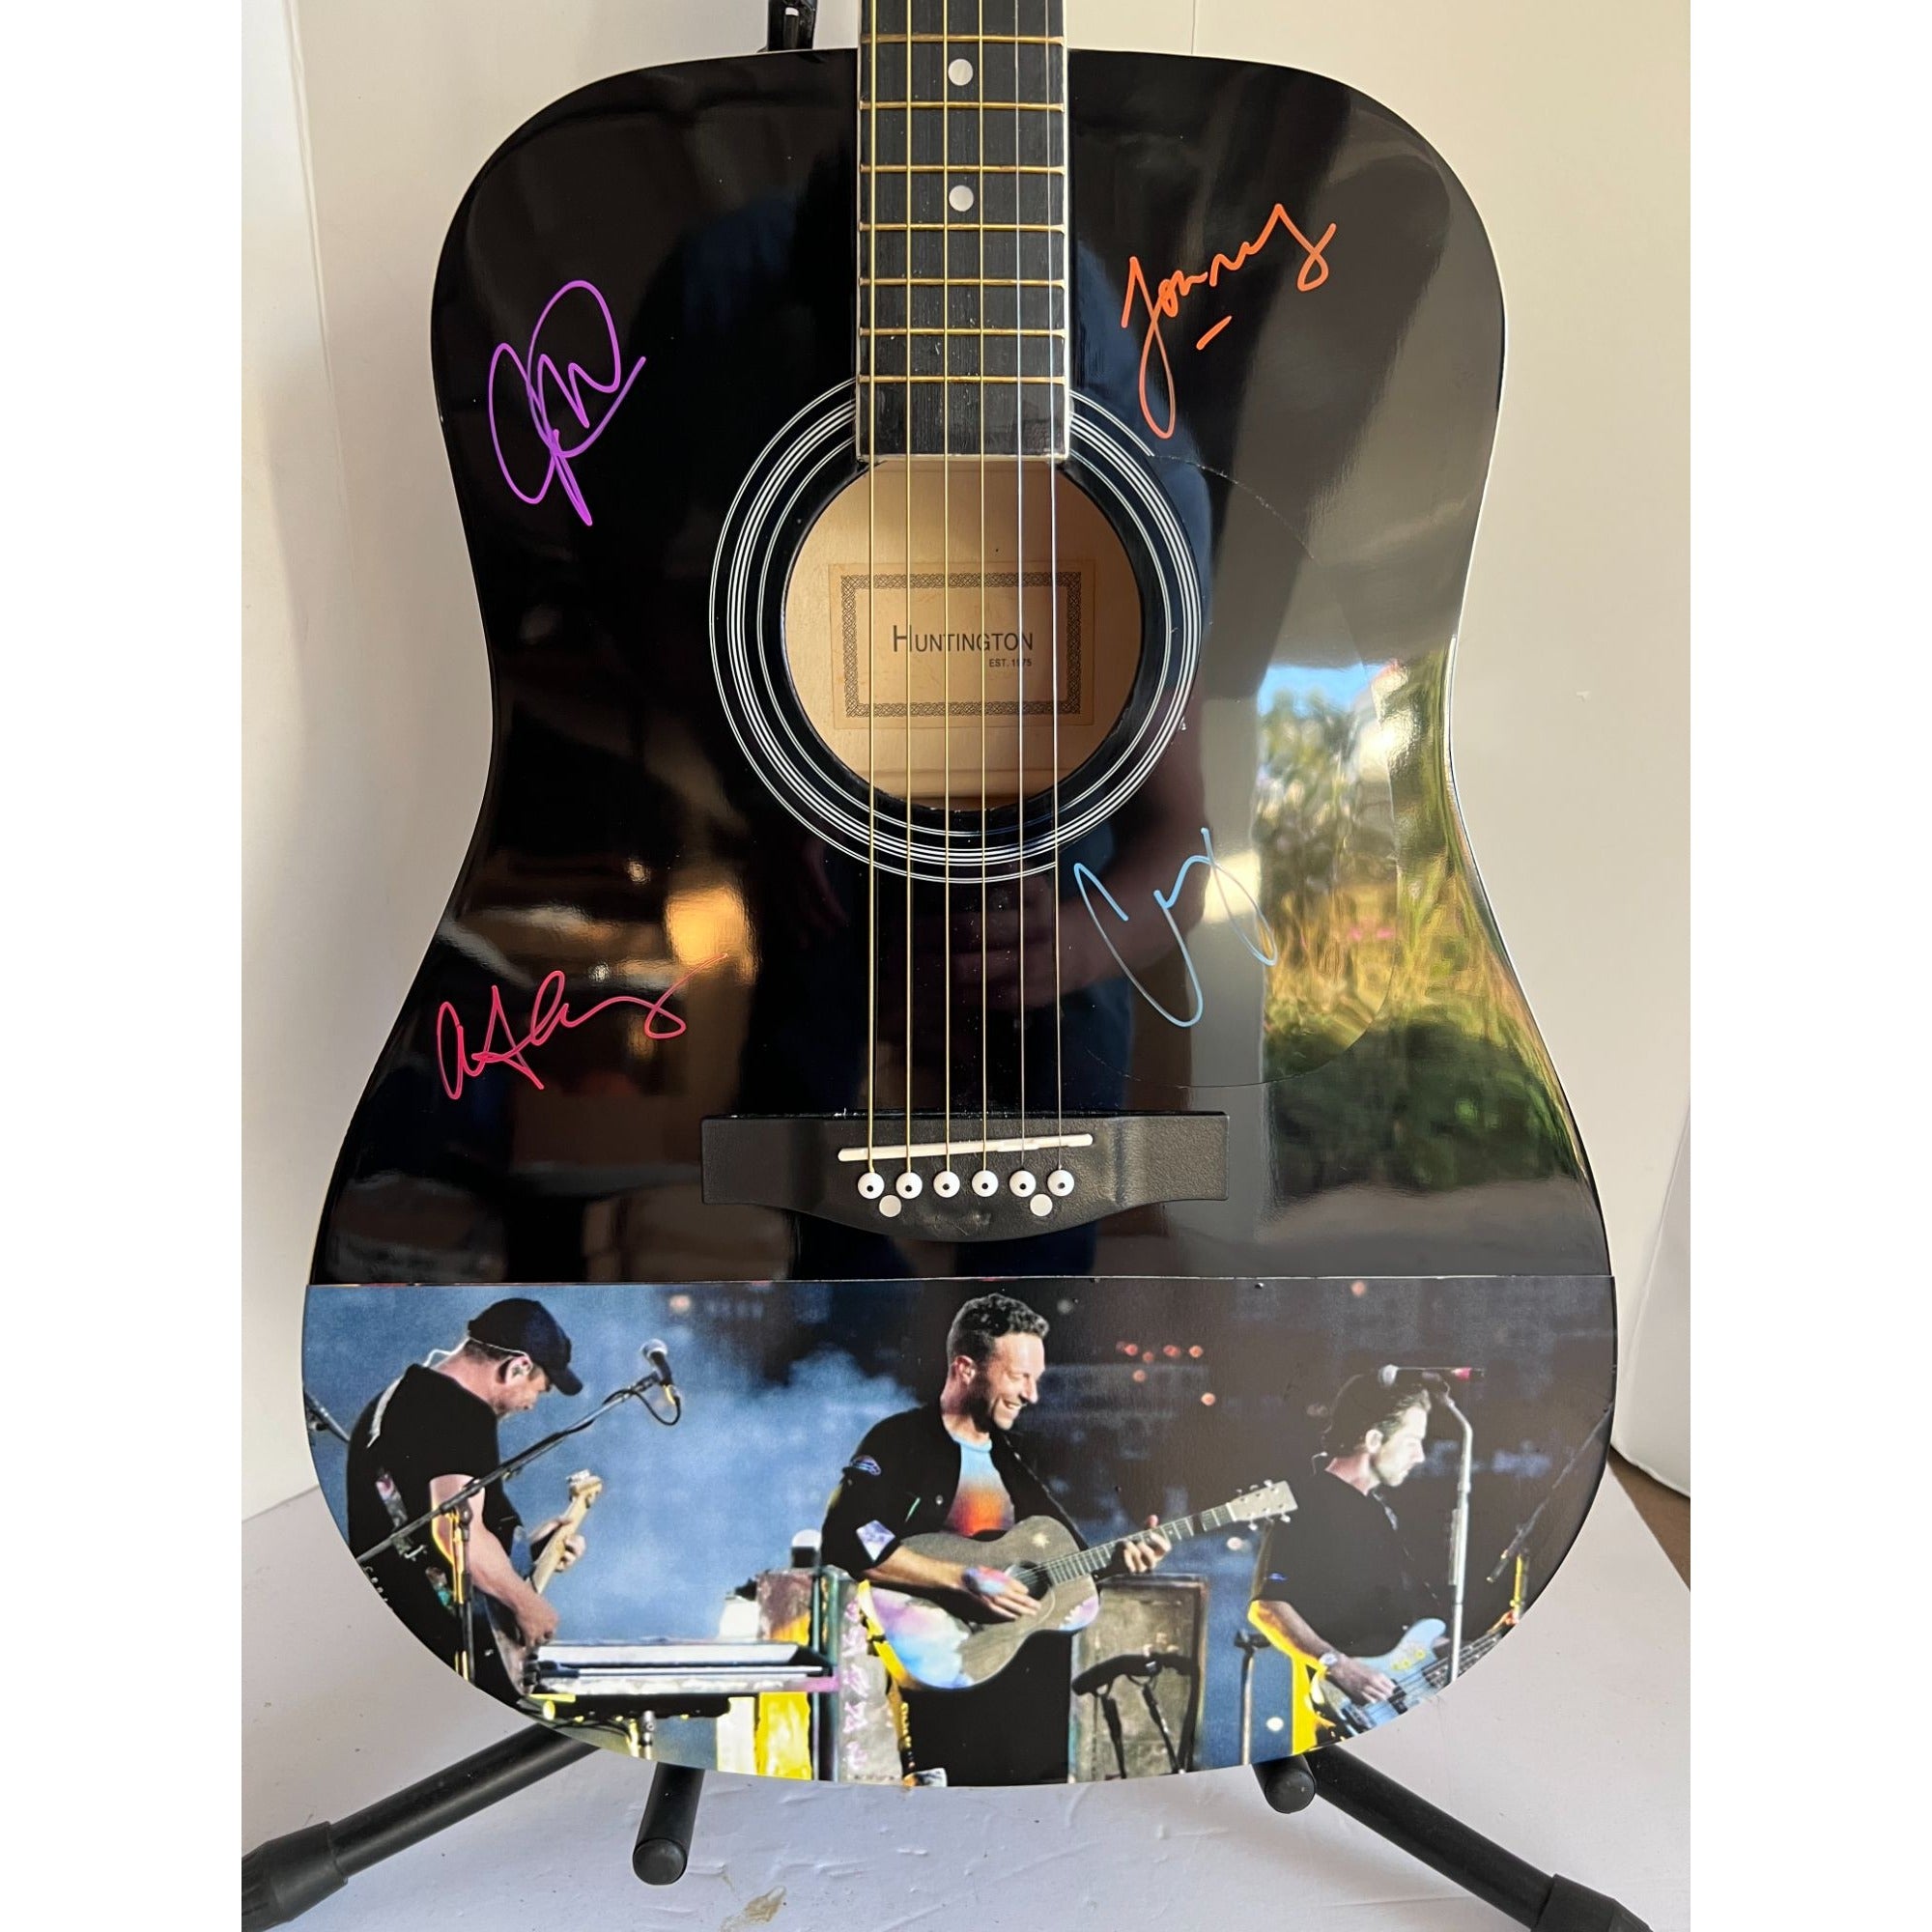 Coldplay One of A kind 39' inch full size acoustic guitar signed